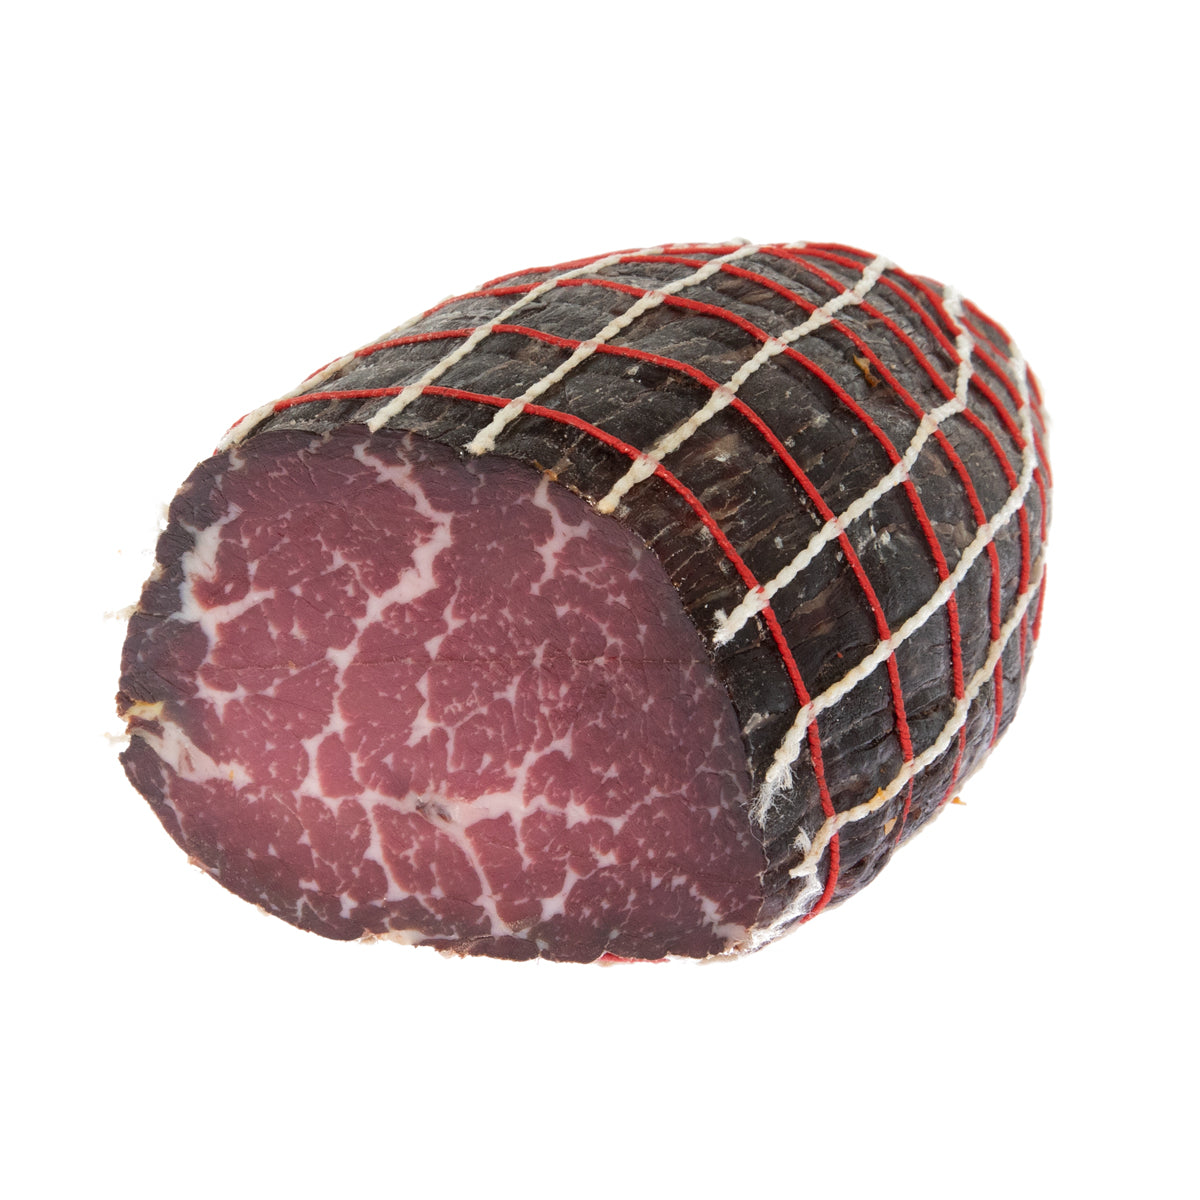 The Spotted Trotter Beef Bresaola